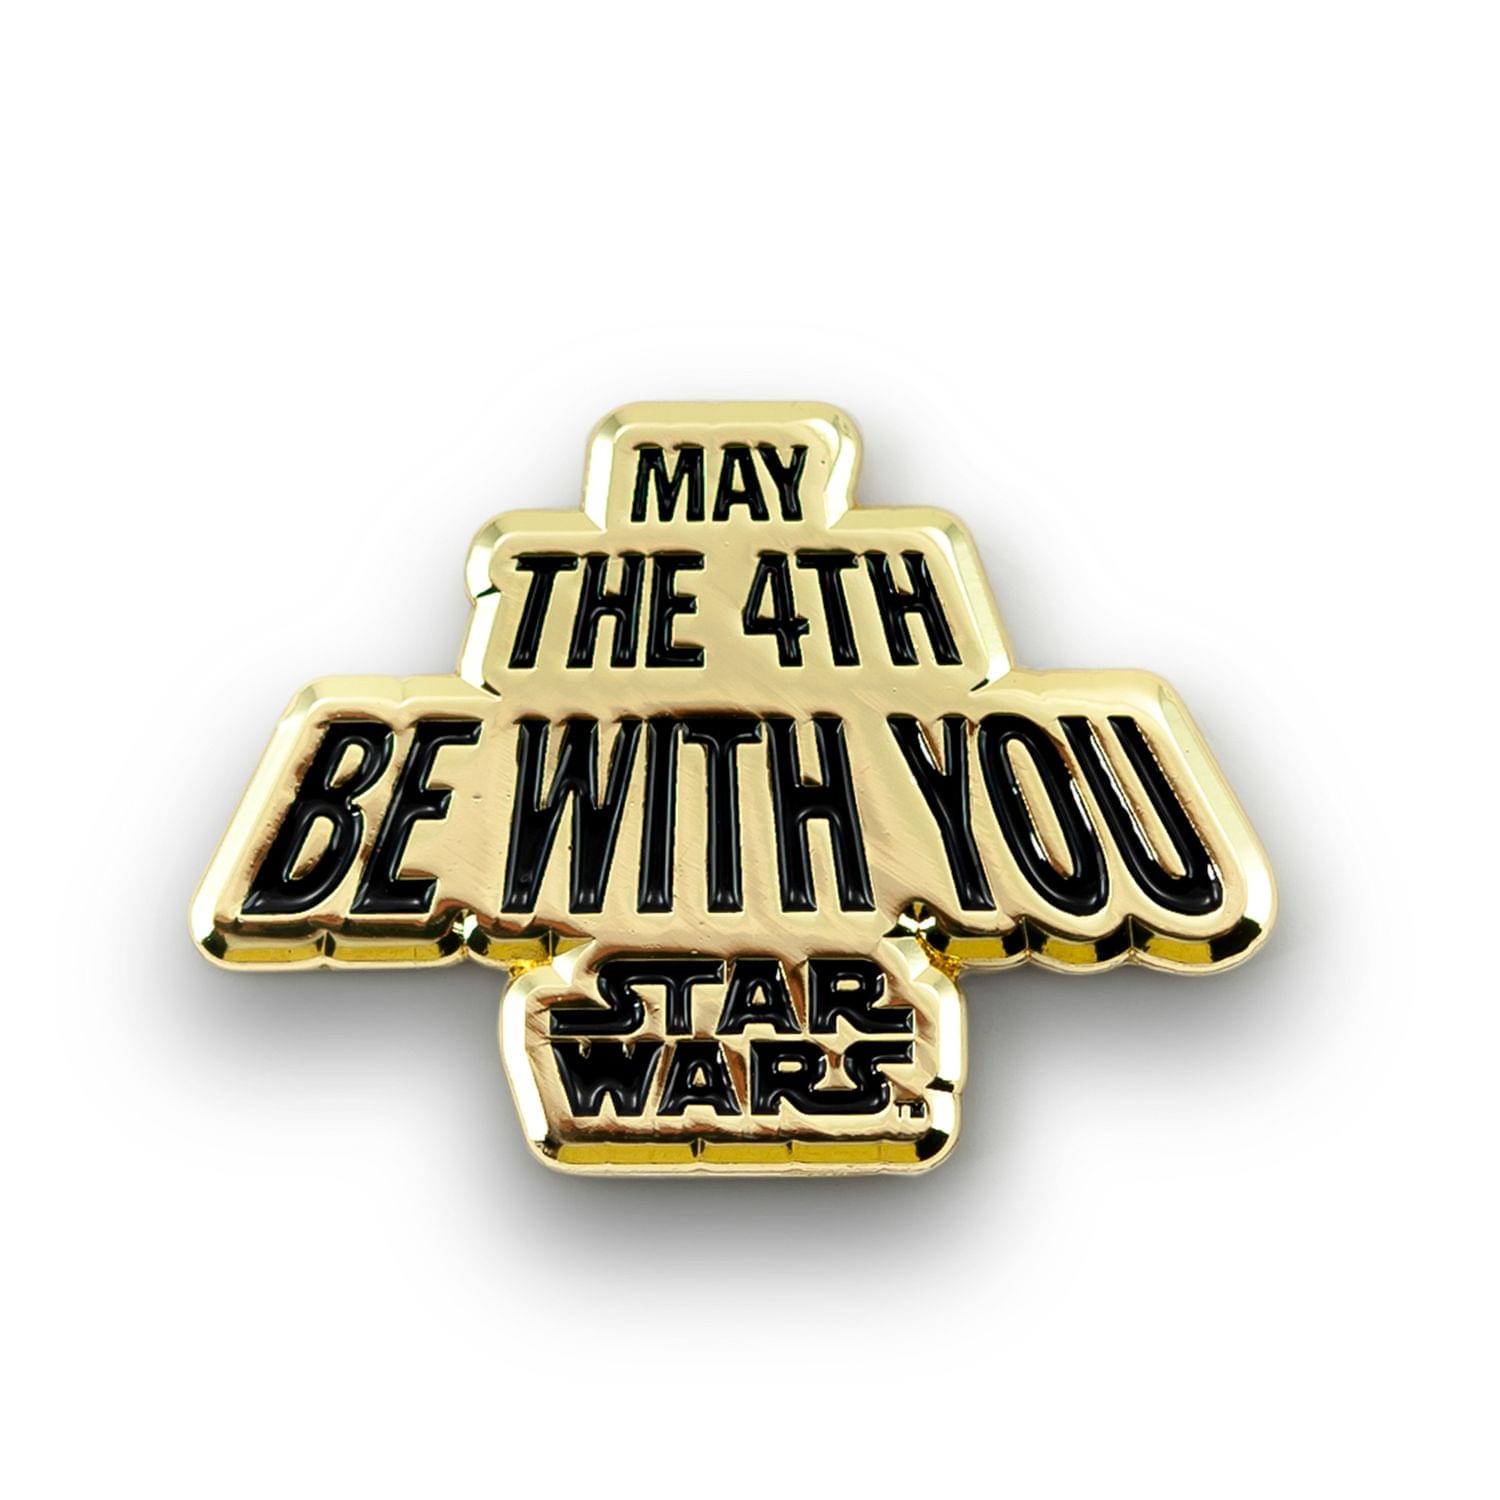 Star Wars May The Fourth Be With You Pin Gold Edition | Star Wars Collector Pin